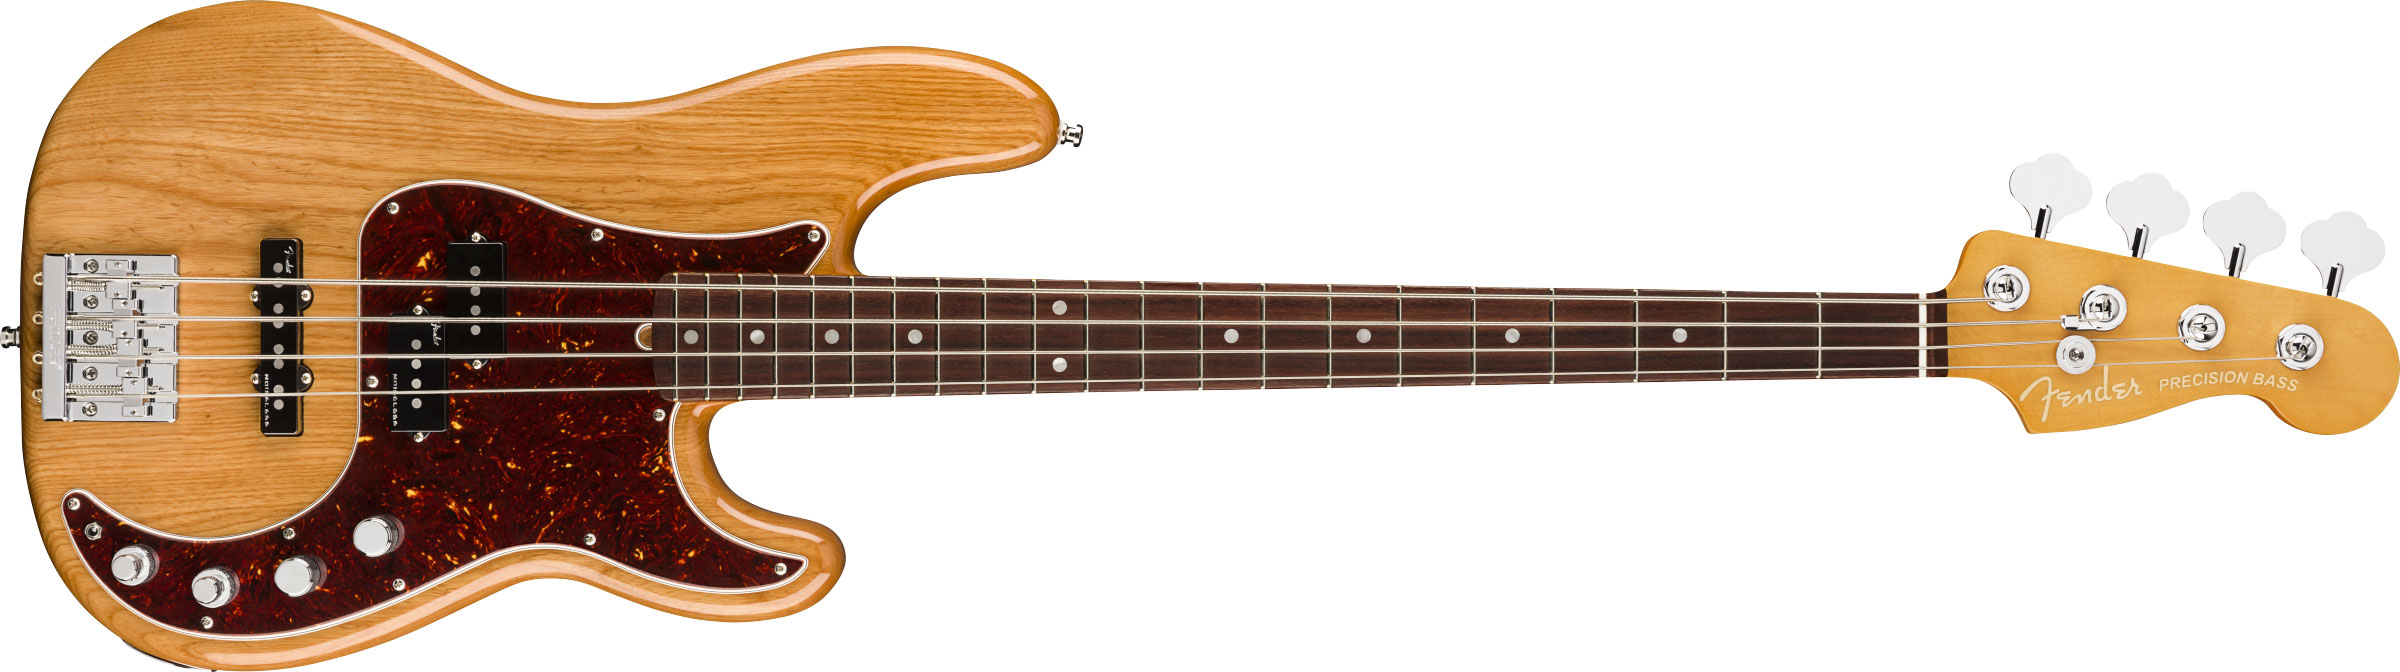 CONTRABAIXO FENDER AM ULTRA PRECISION BASS ROSEWOOD 019-9010-734 AGED NATURAL